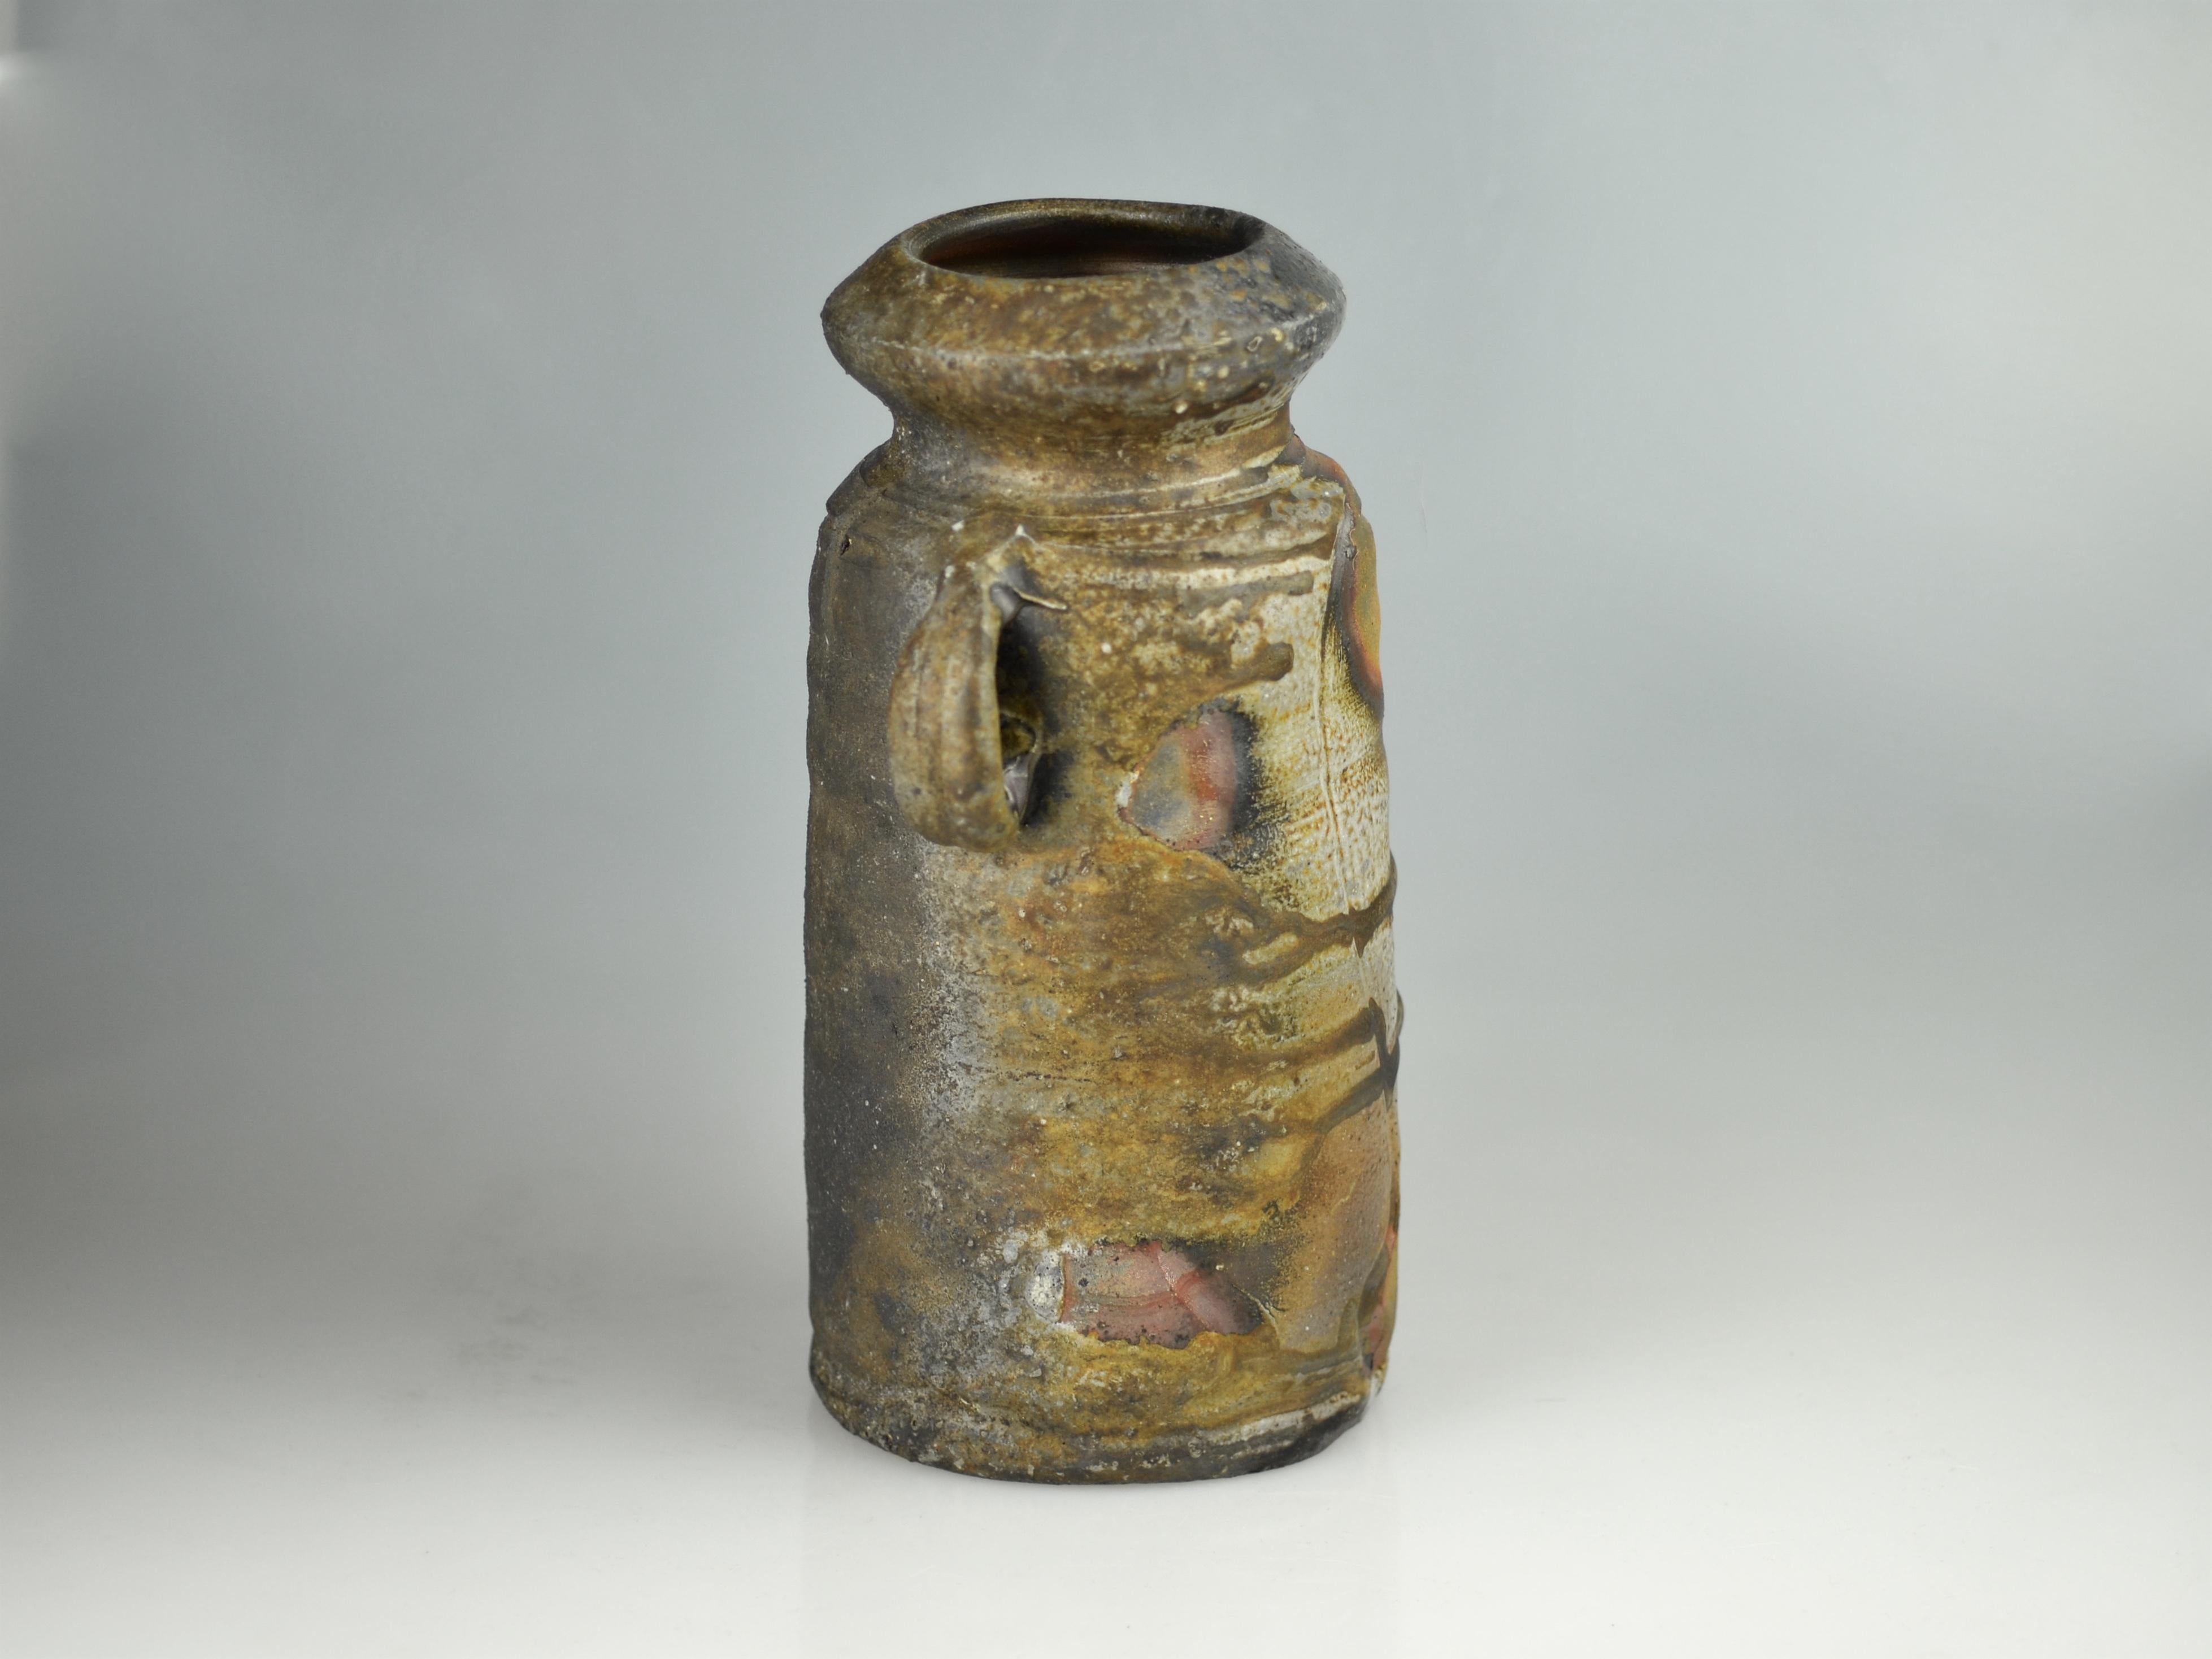 An outstanding, museum quality Bizen flower vase made by Kimura Sojô (*1945), who has been trained by famous Living National Treasure Isezaki Jun (*1936). This extraordinary piece bears exceptional patterns of highly developed techniques unique to